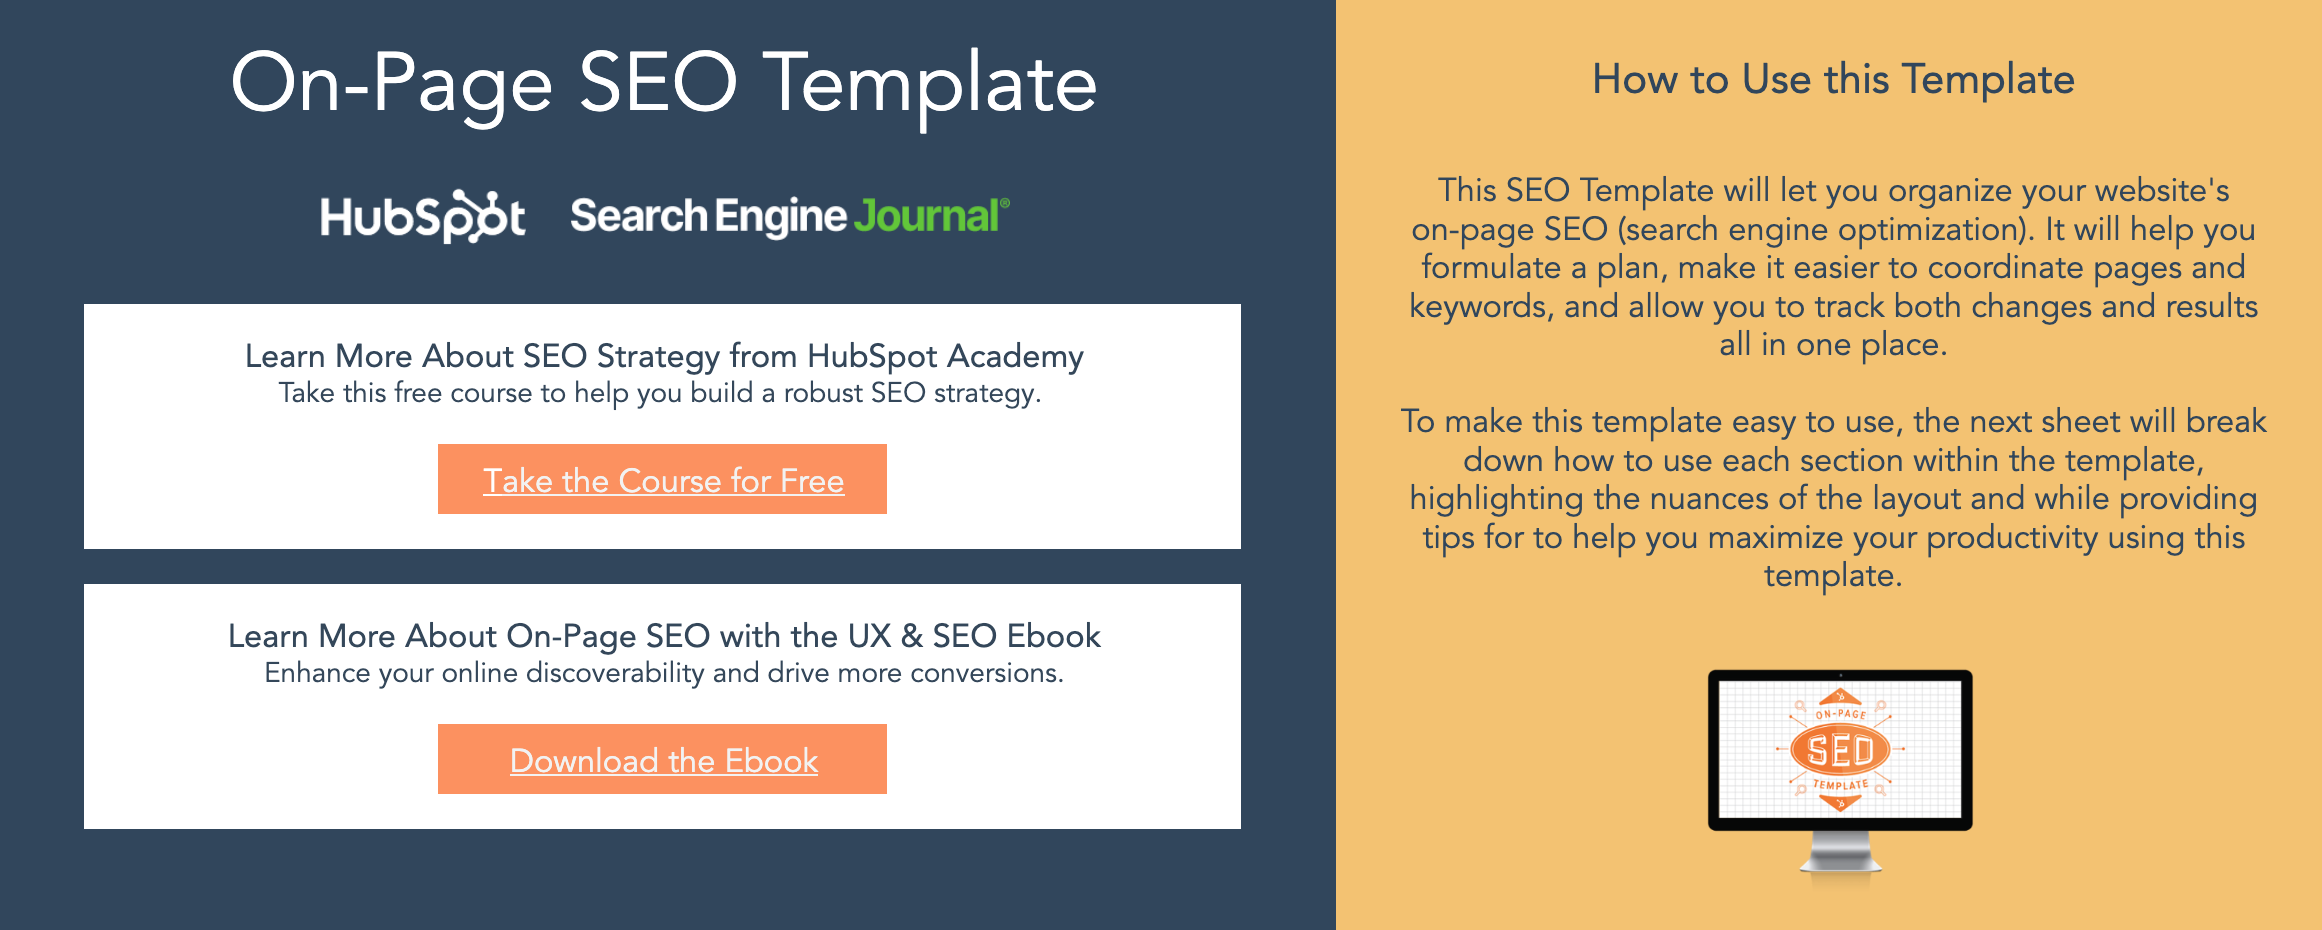 On-page SEO template cover